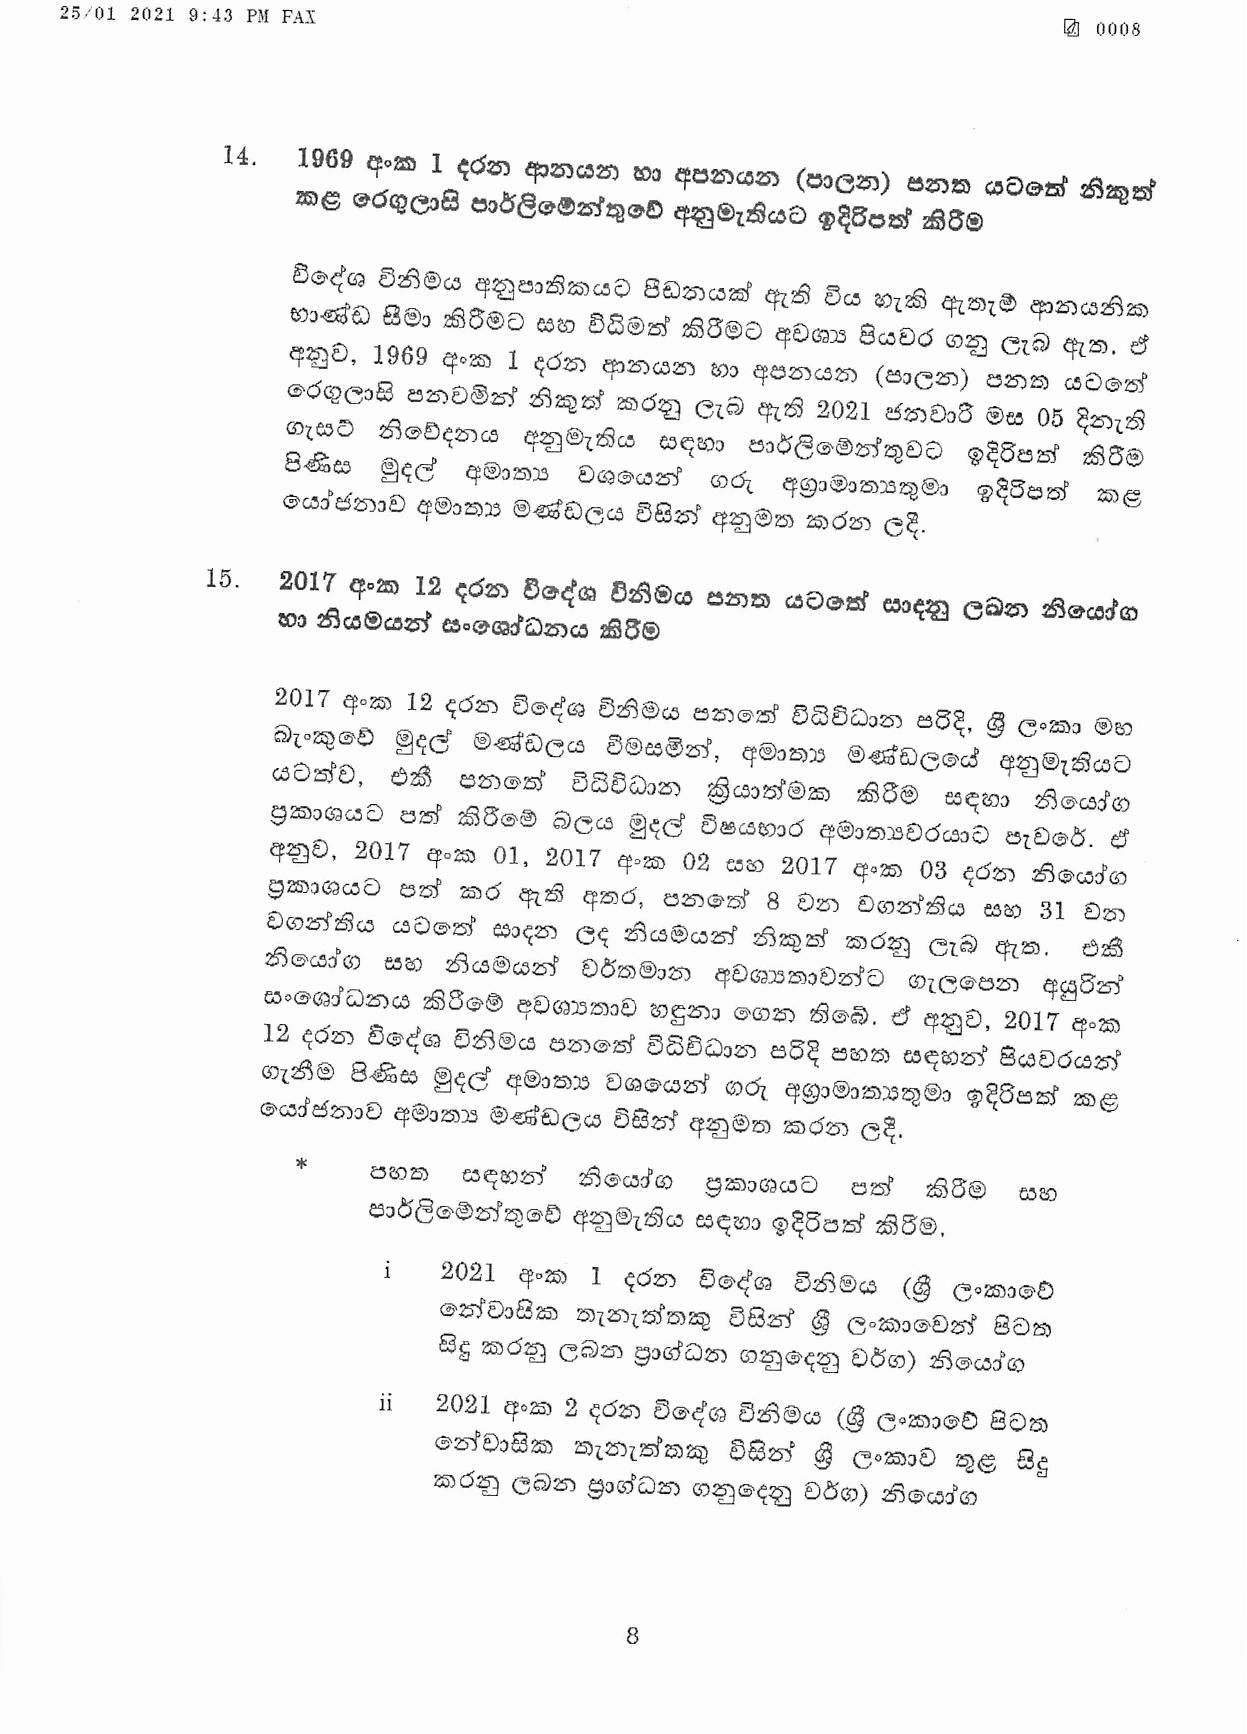 Cabinet Decision on 25.01.2021 page 008